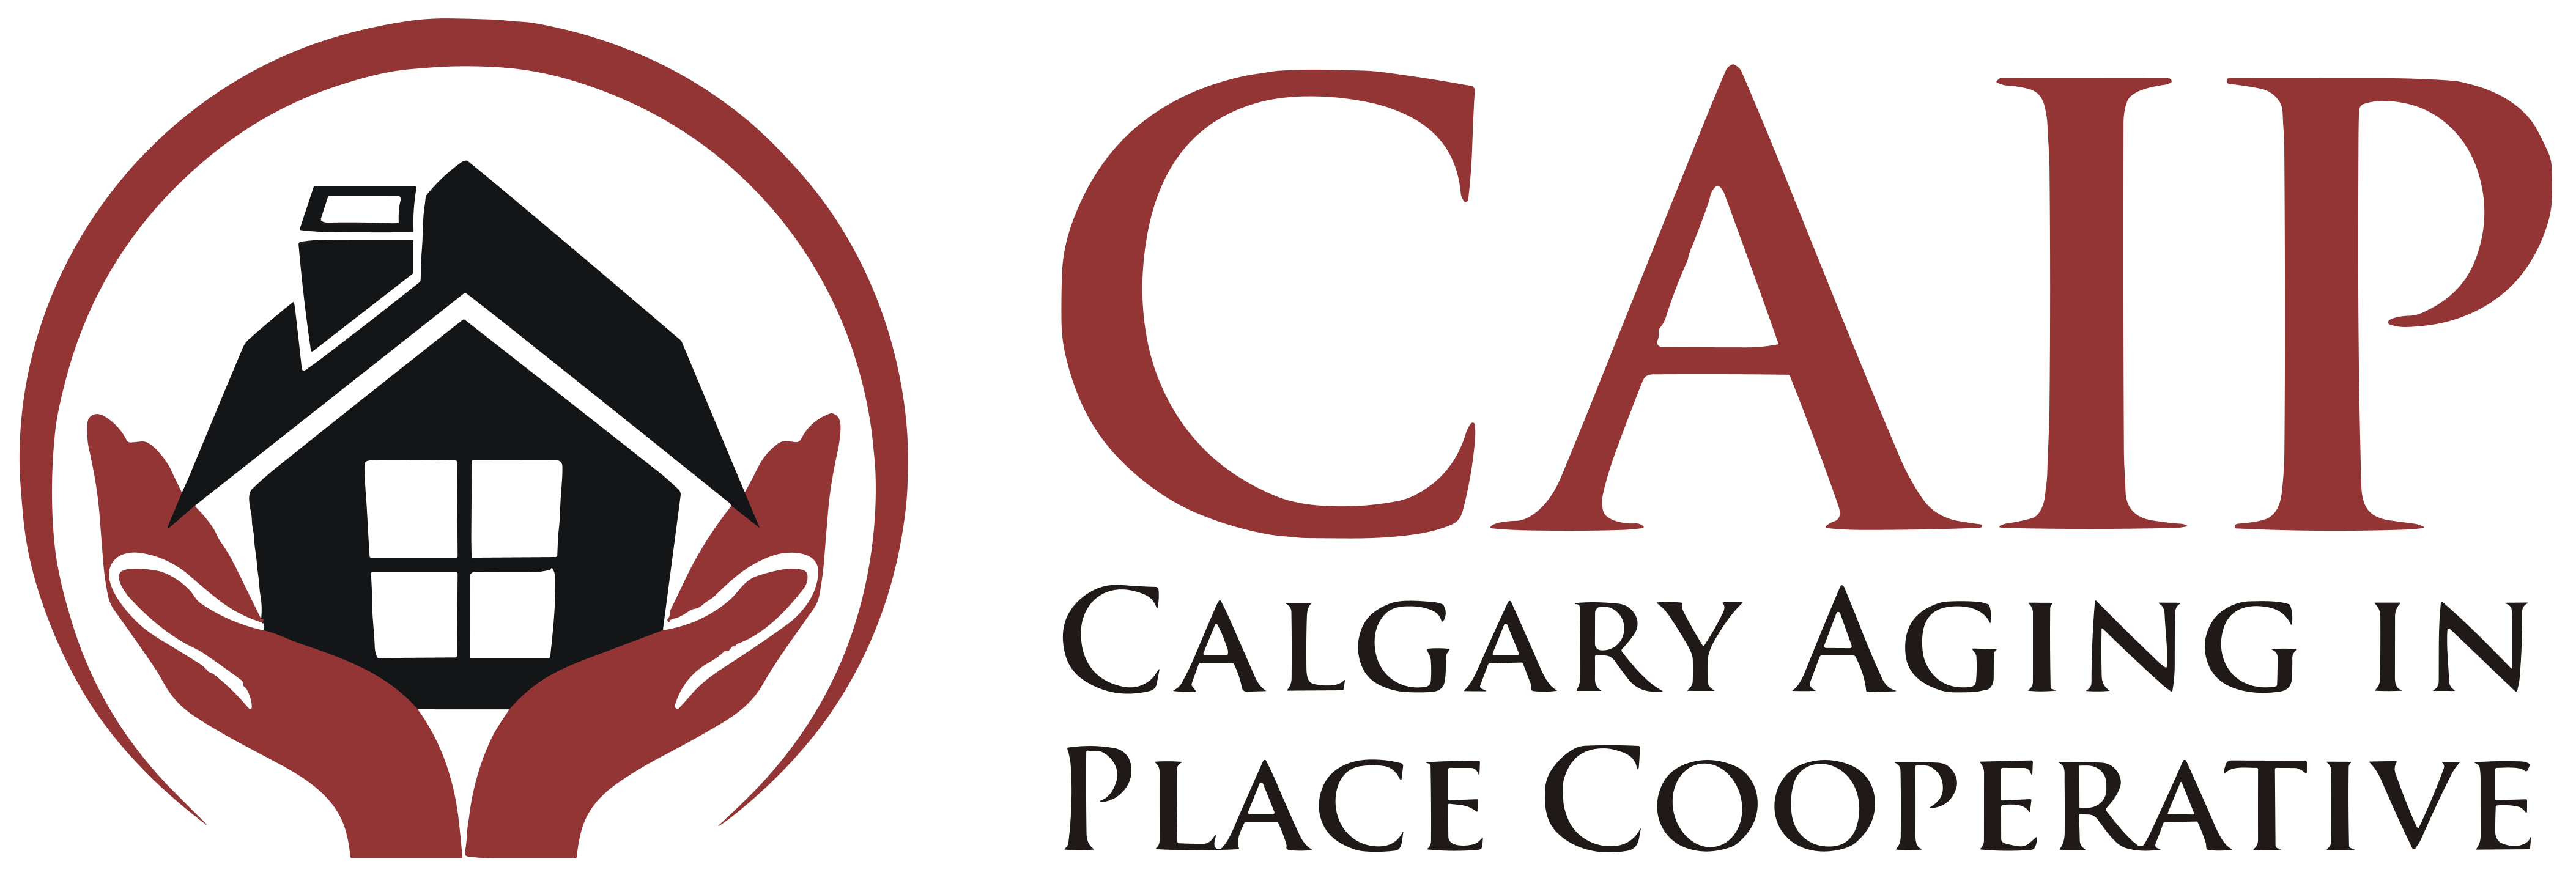 Logo for Calgary Aging In Place Co-operative on a transparent background